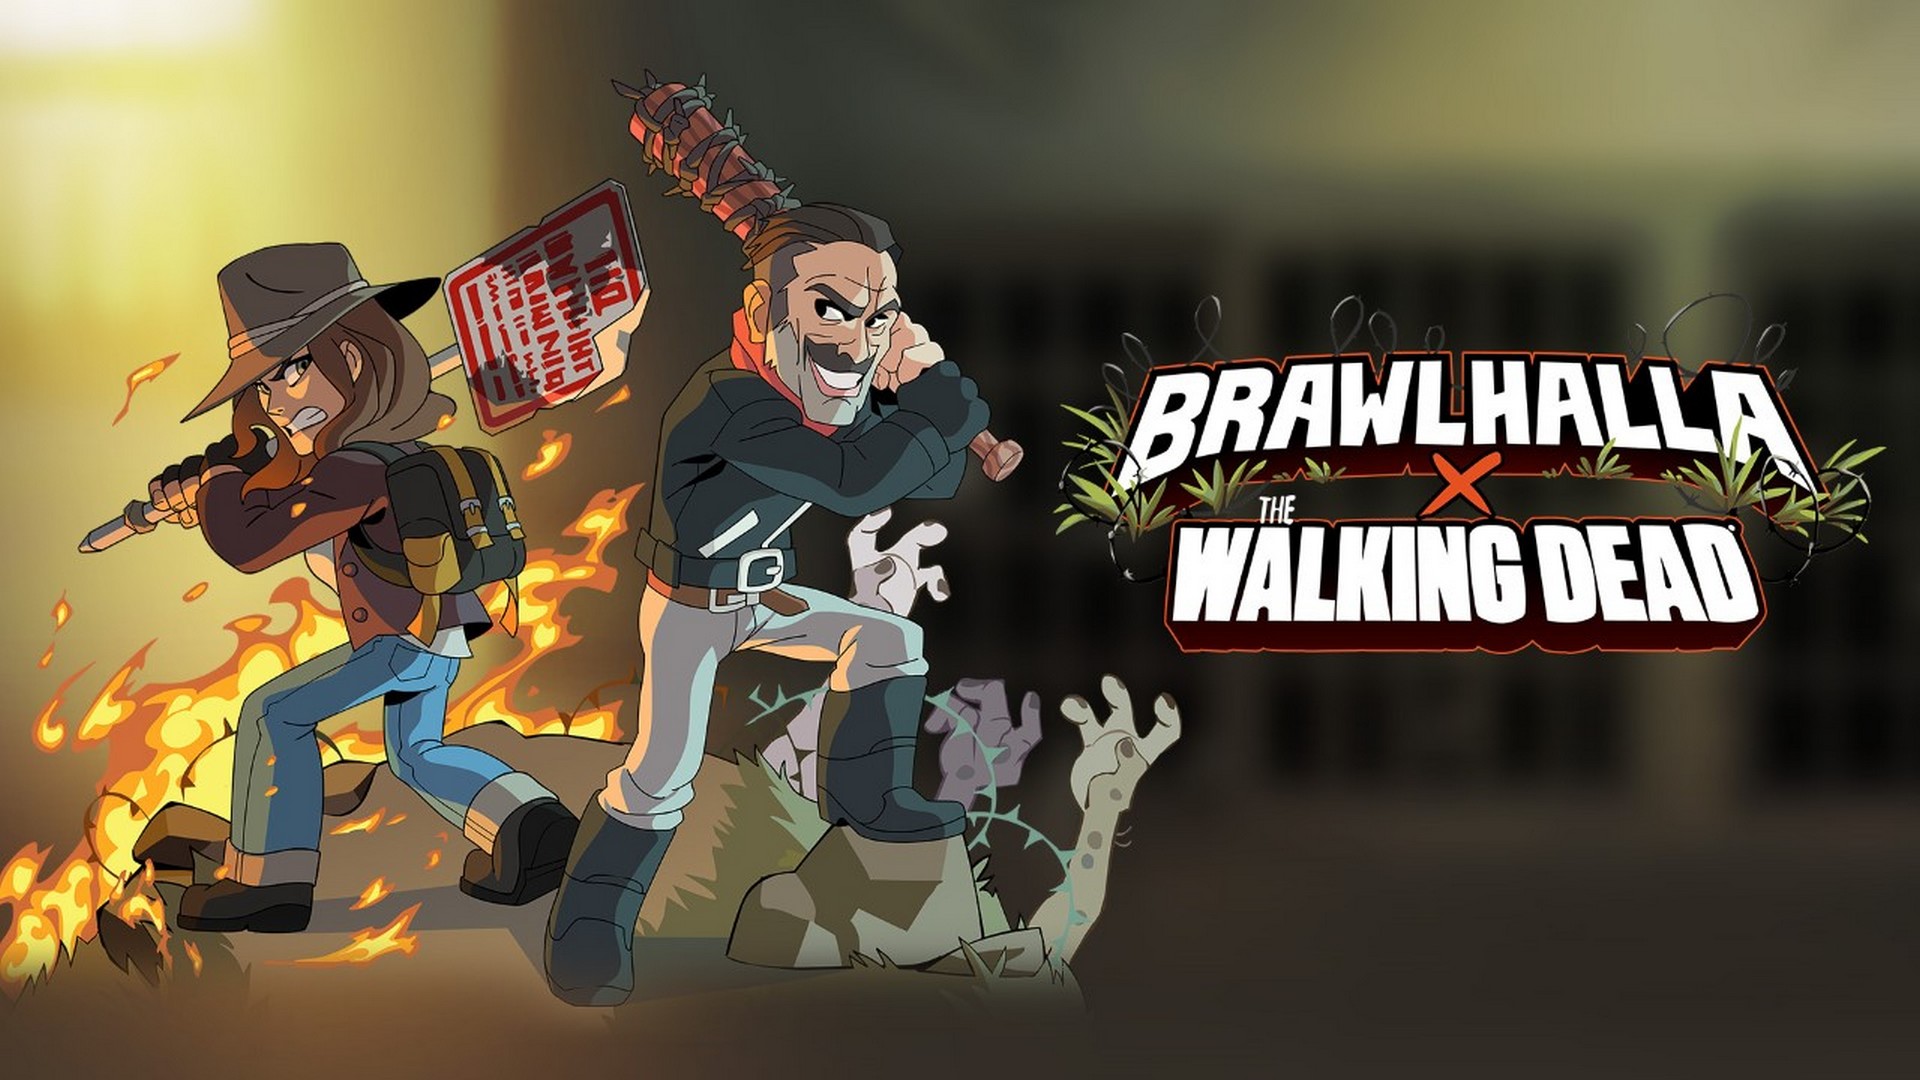 Negan & Maggie From AMC’s The Walking Dead Join The Fight In BRAWLHALLA Today